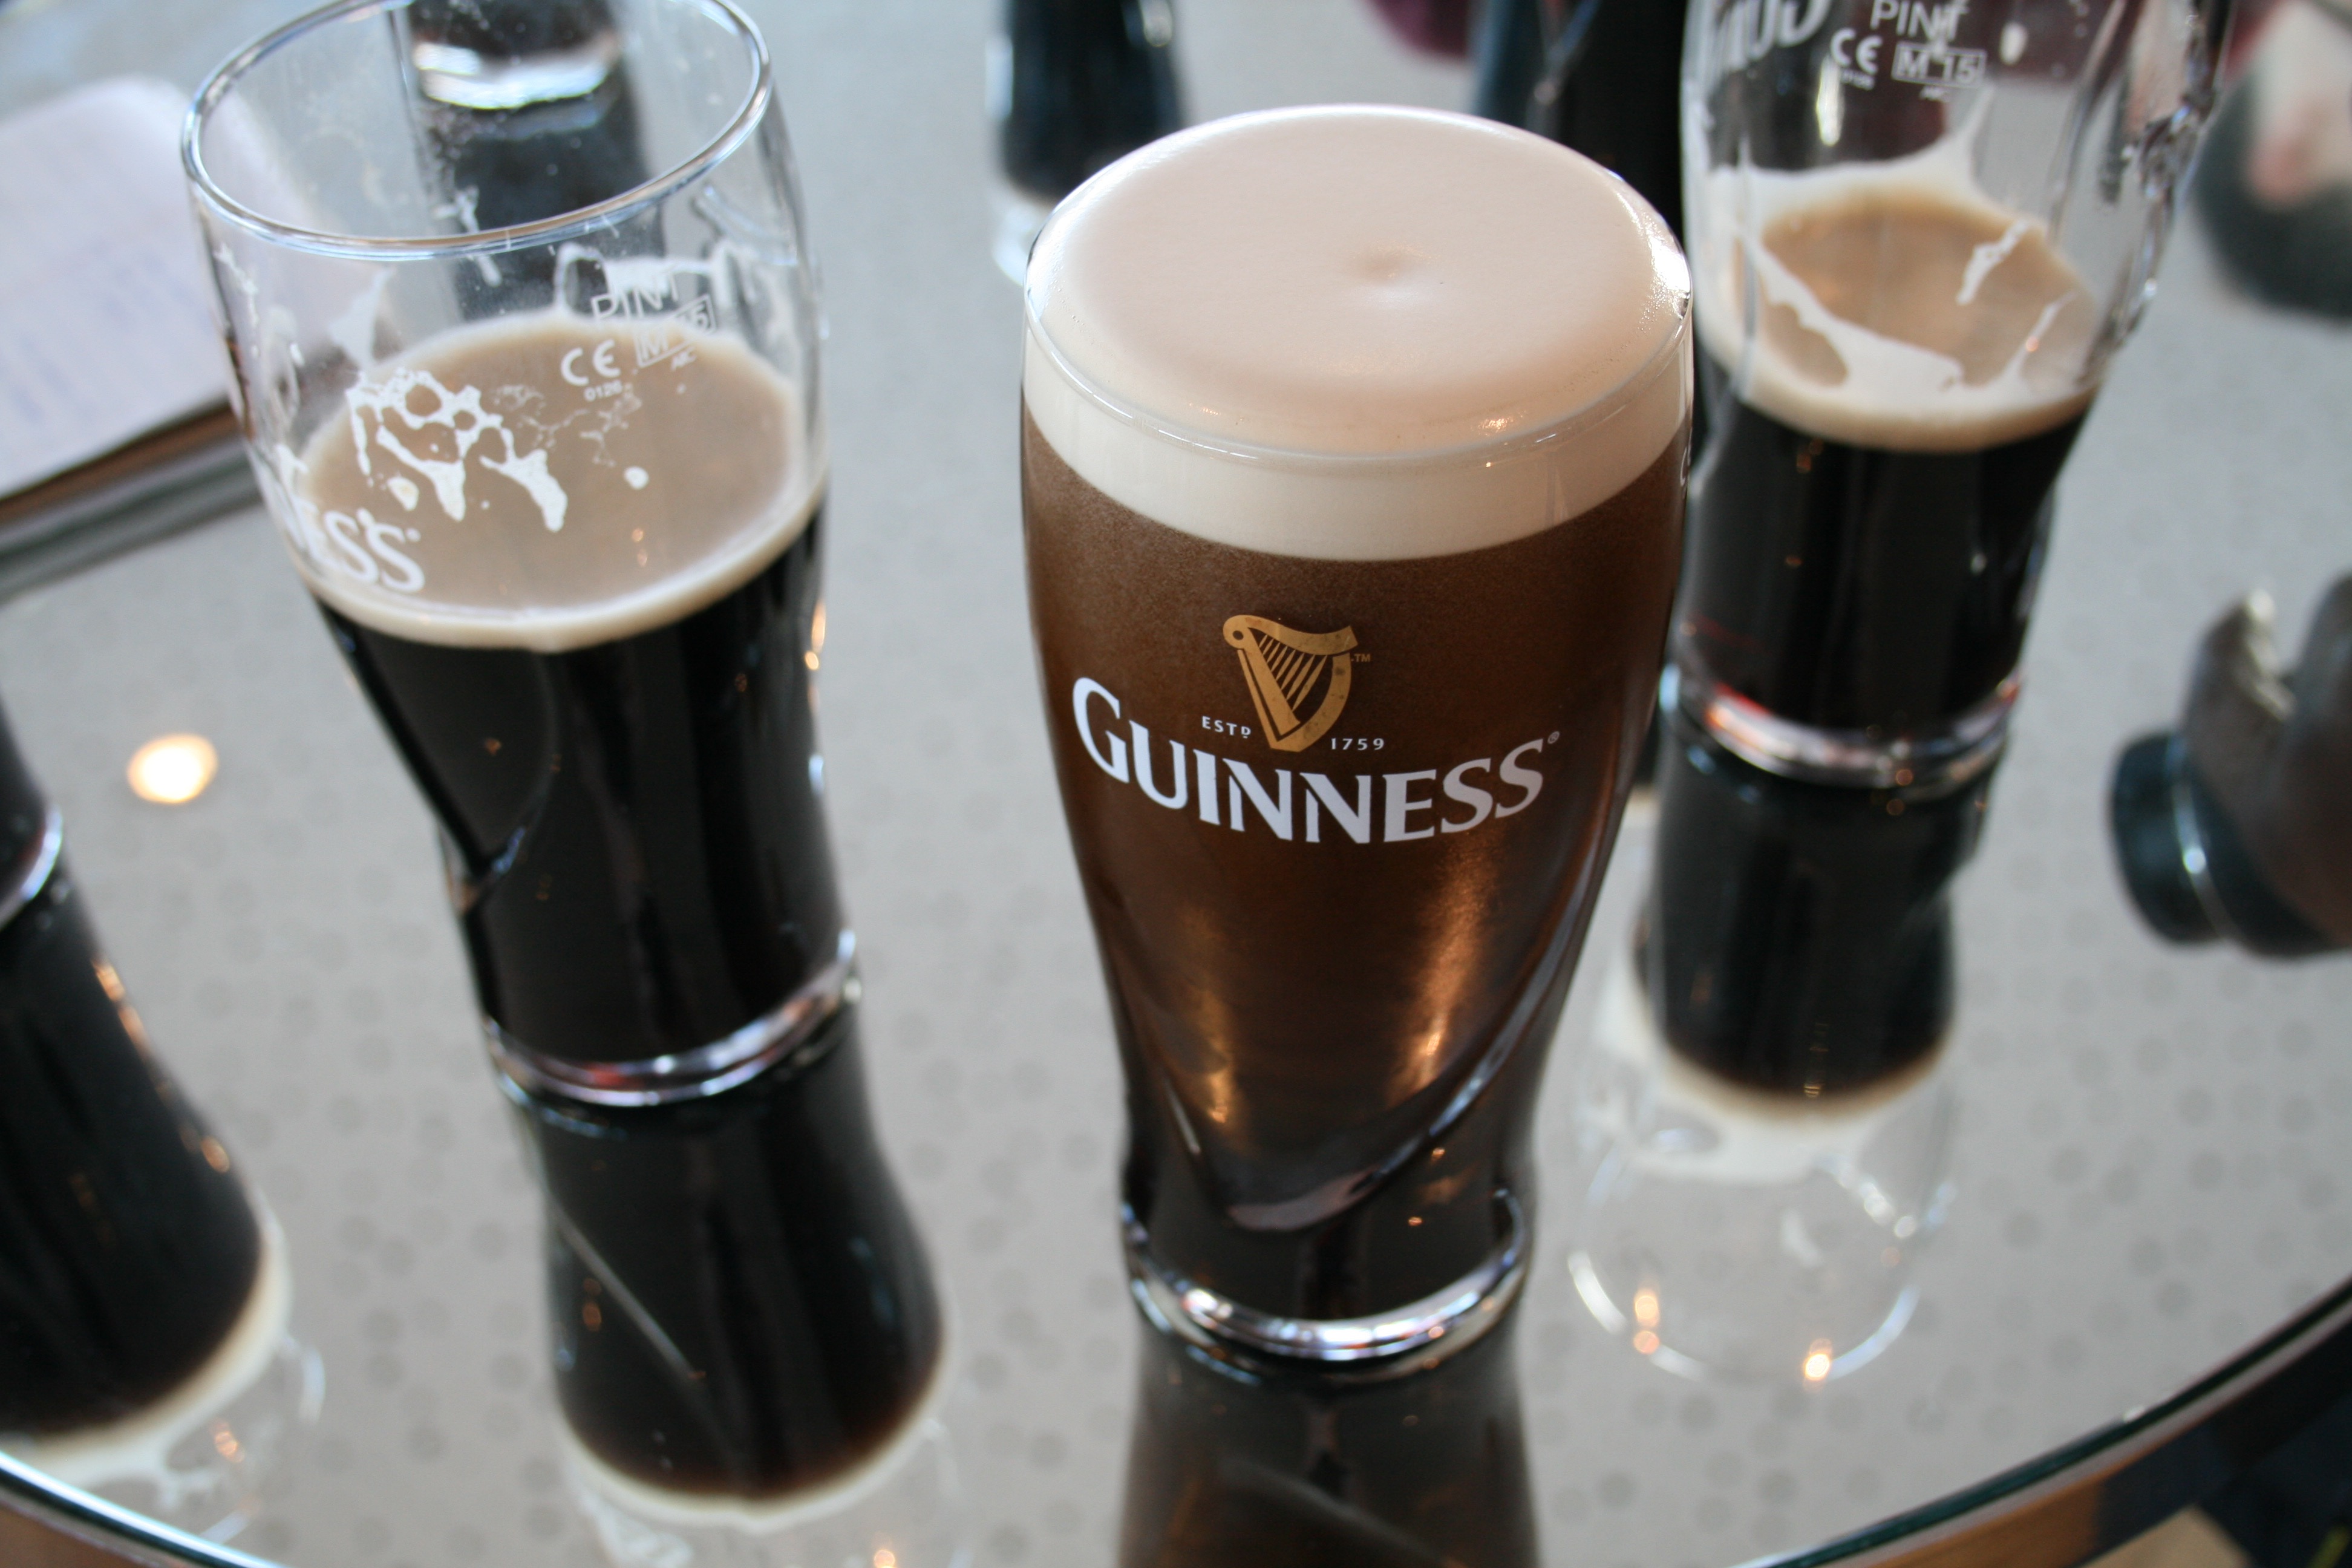 Pints of Guinness at the Gravity Bar atop the Guinness Storehouse in Dublin, Ireland..